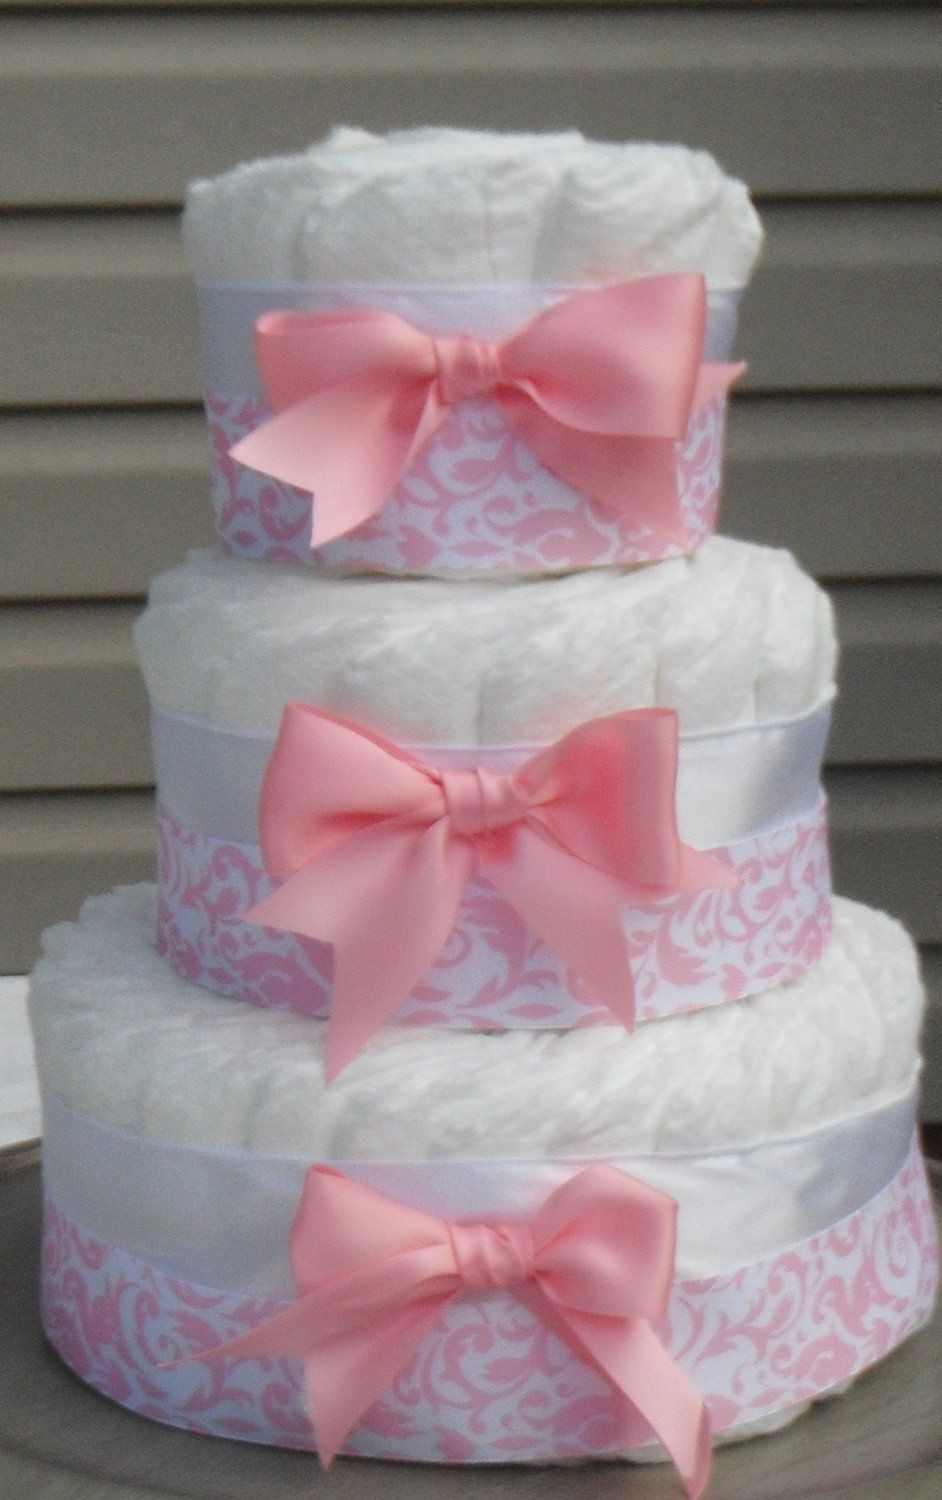 Baby Shower Gifts Made From Diapers
 Pink Damask Diaper Cake for Girls Baby Shower Gift Baby